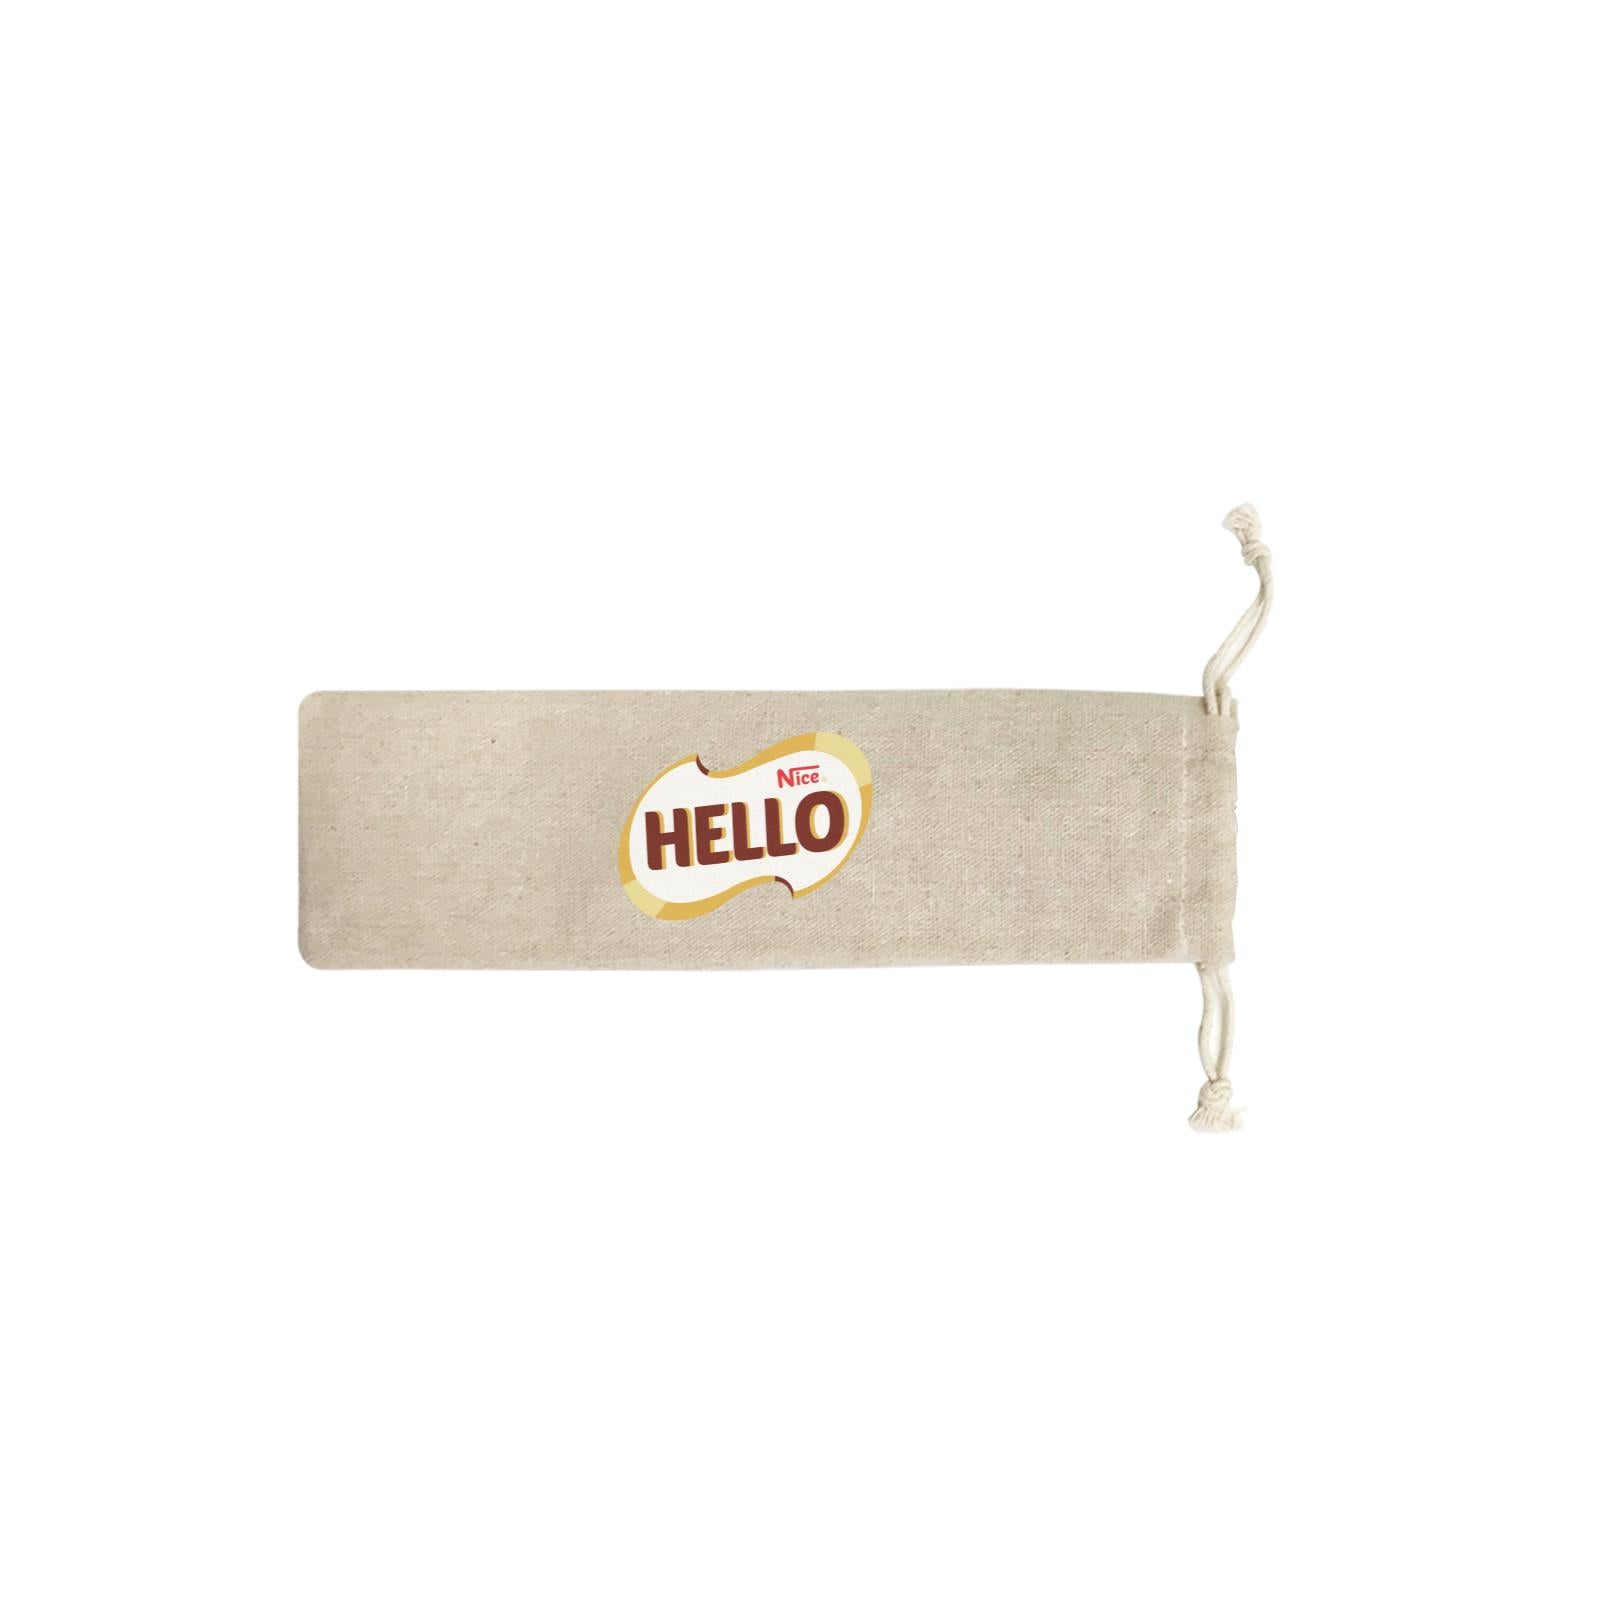 Slang Statement Hello Nice SB Straw Pouch (No Straws included)